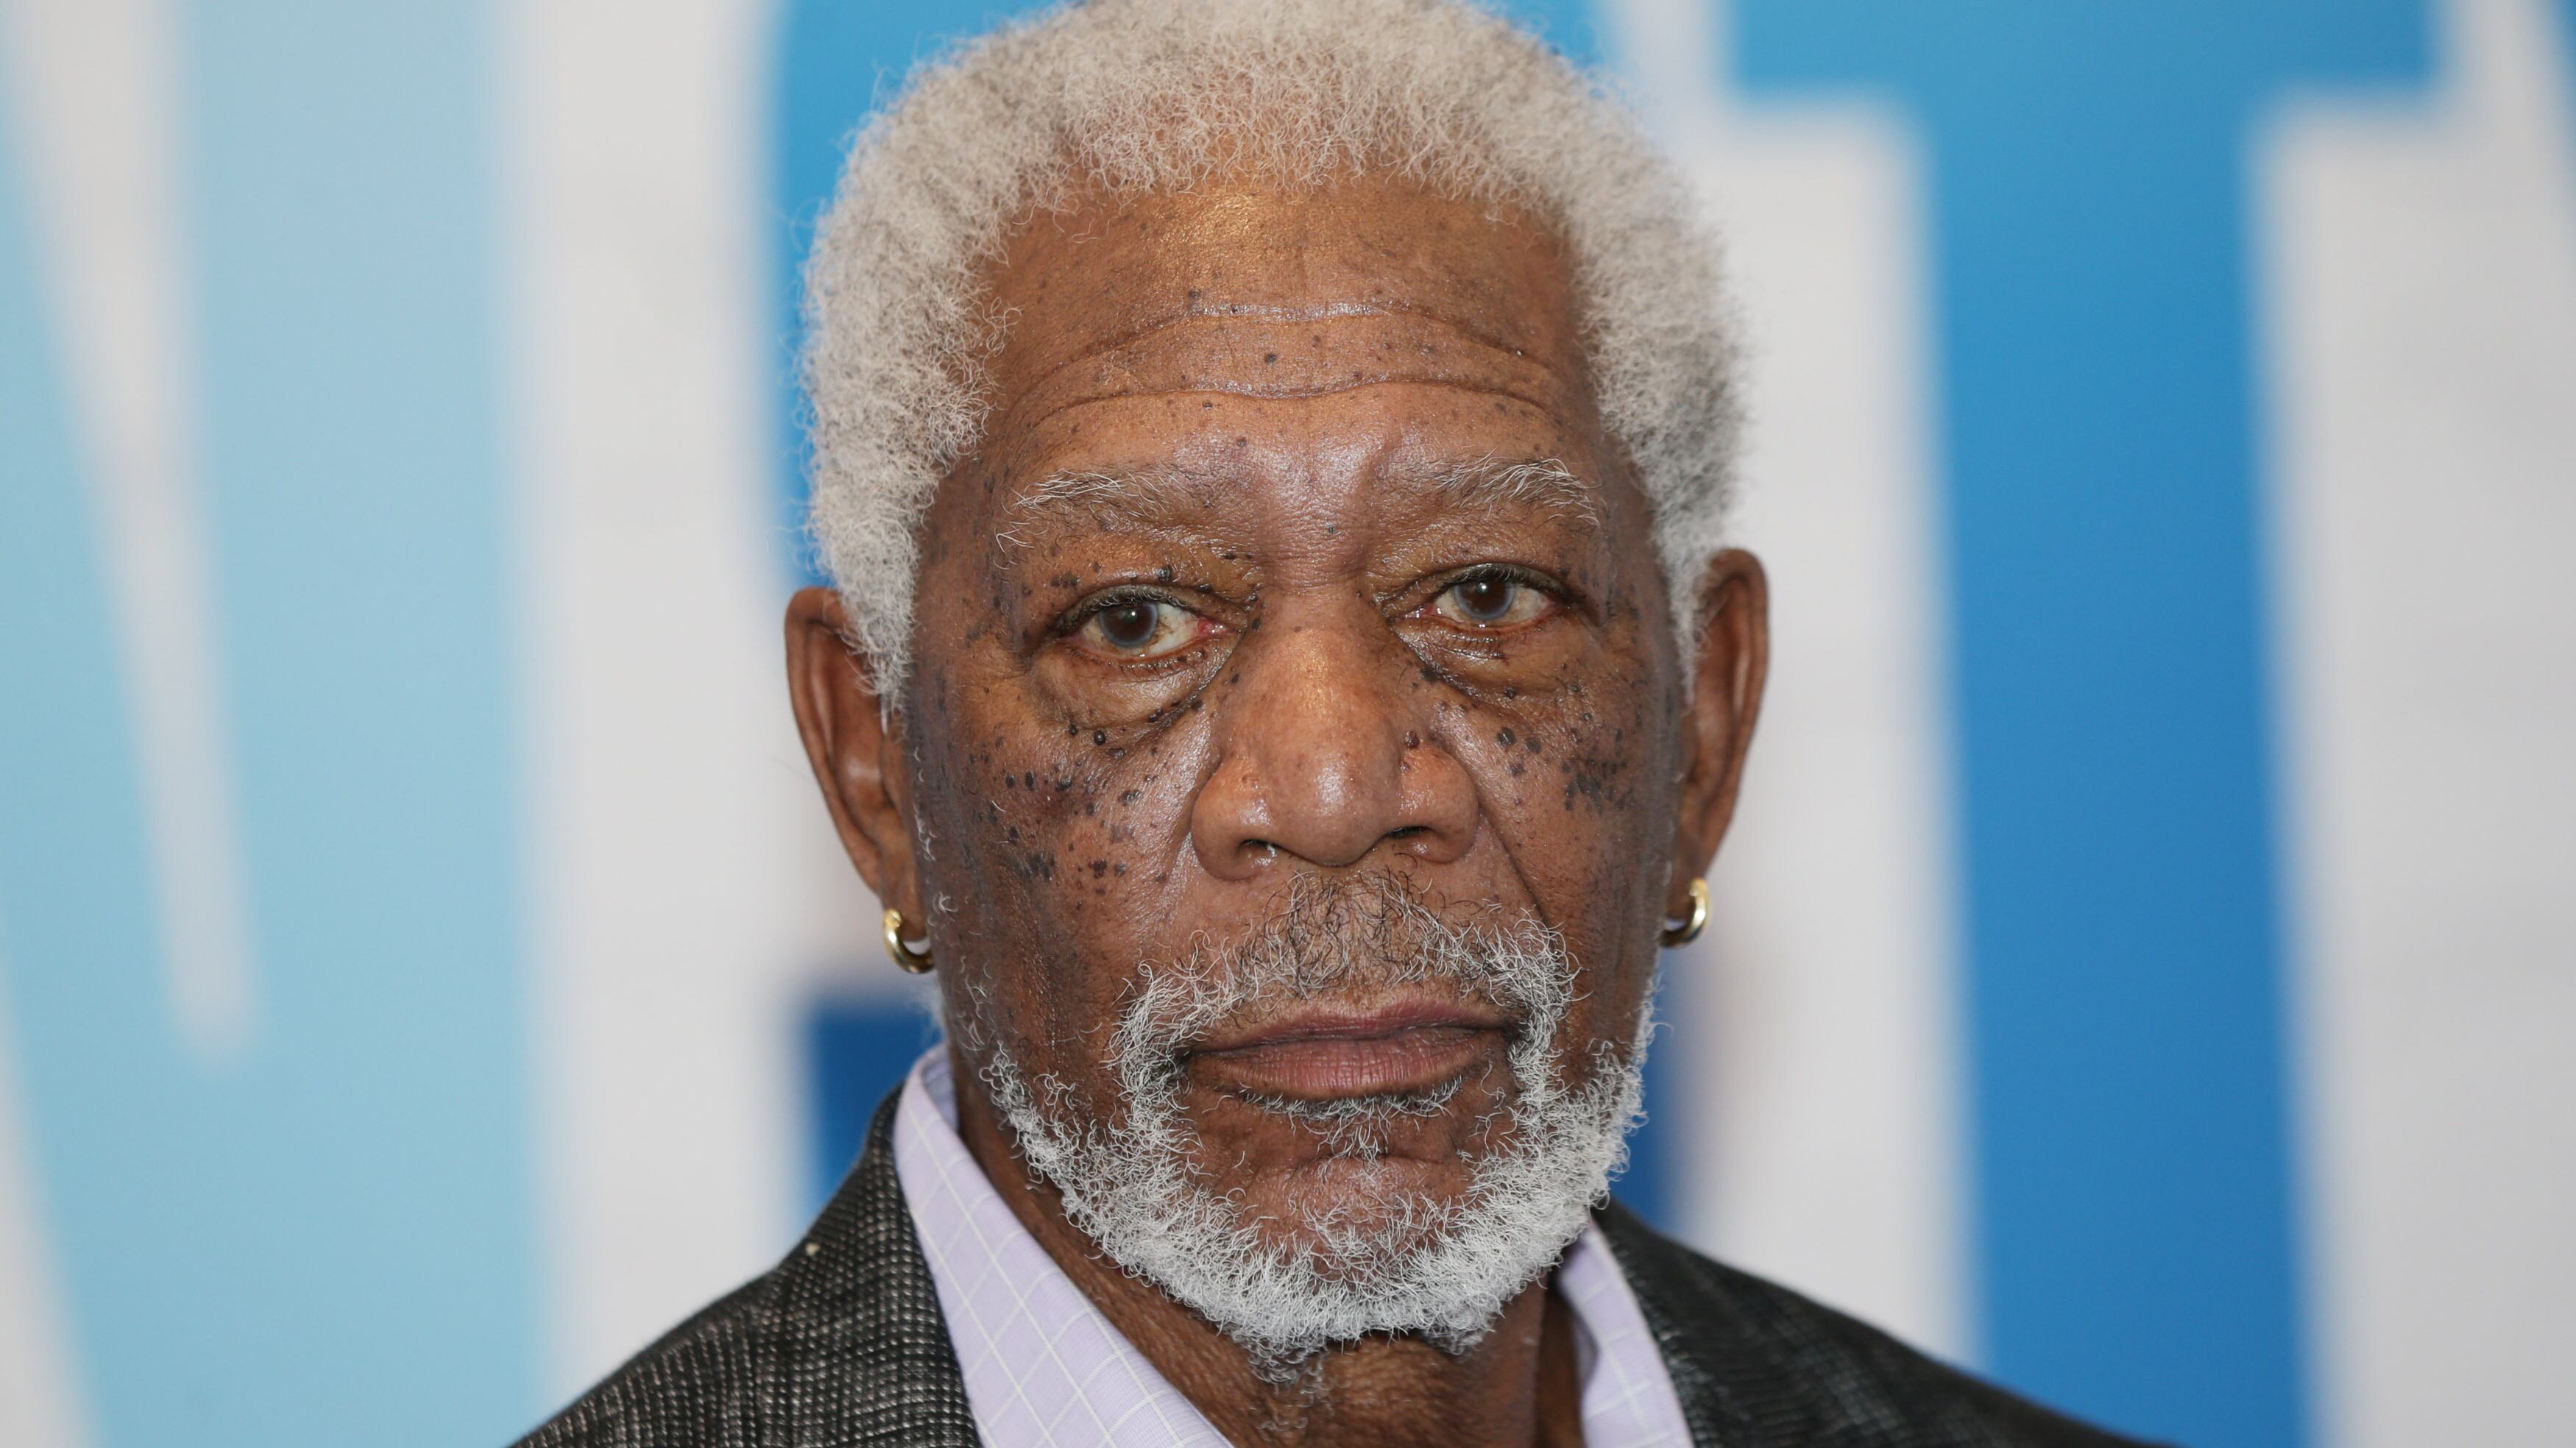 Morgan Freeman thanked people for raising the issue